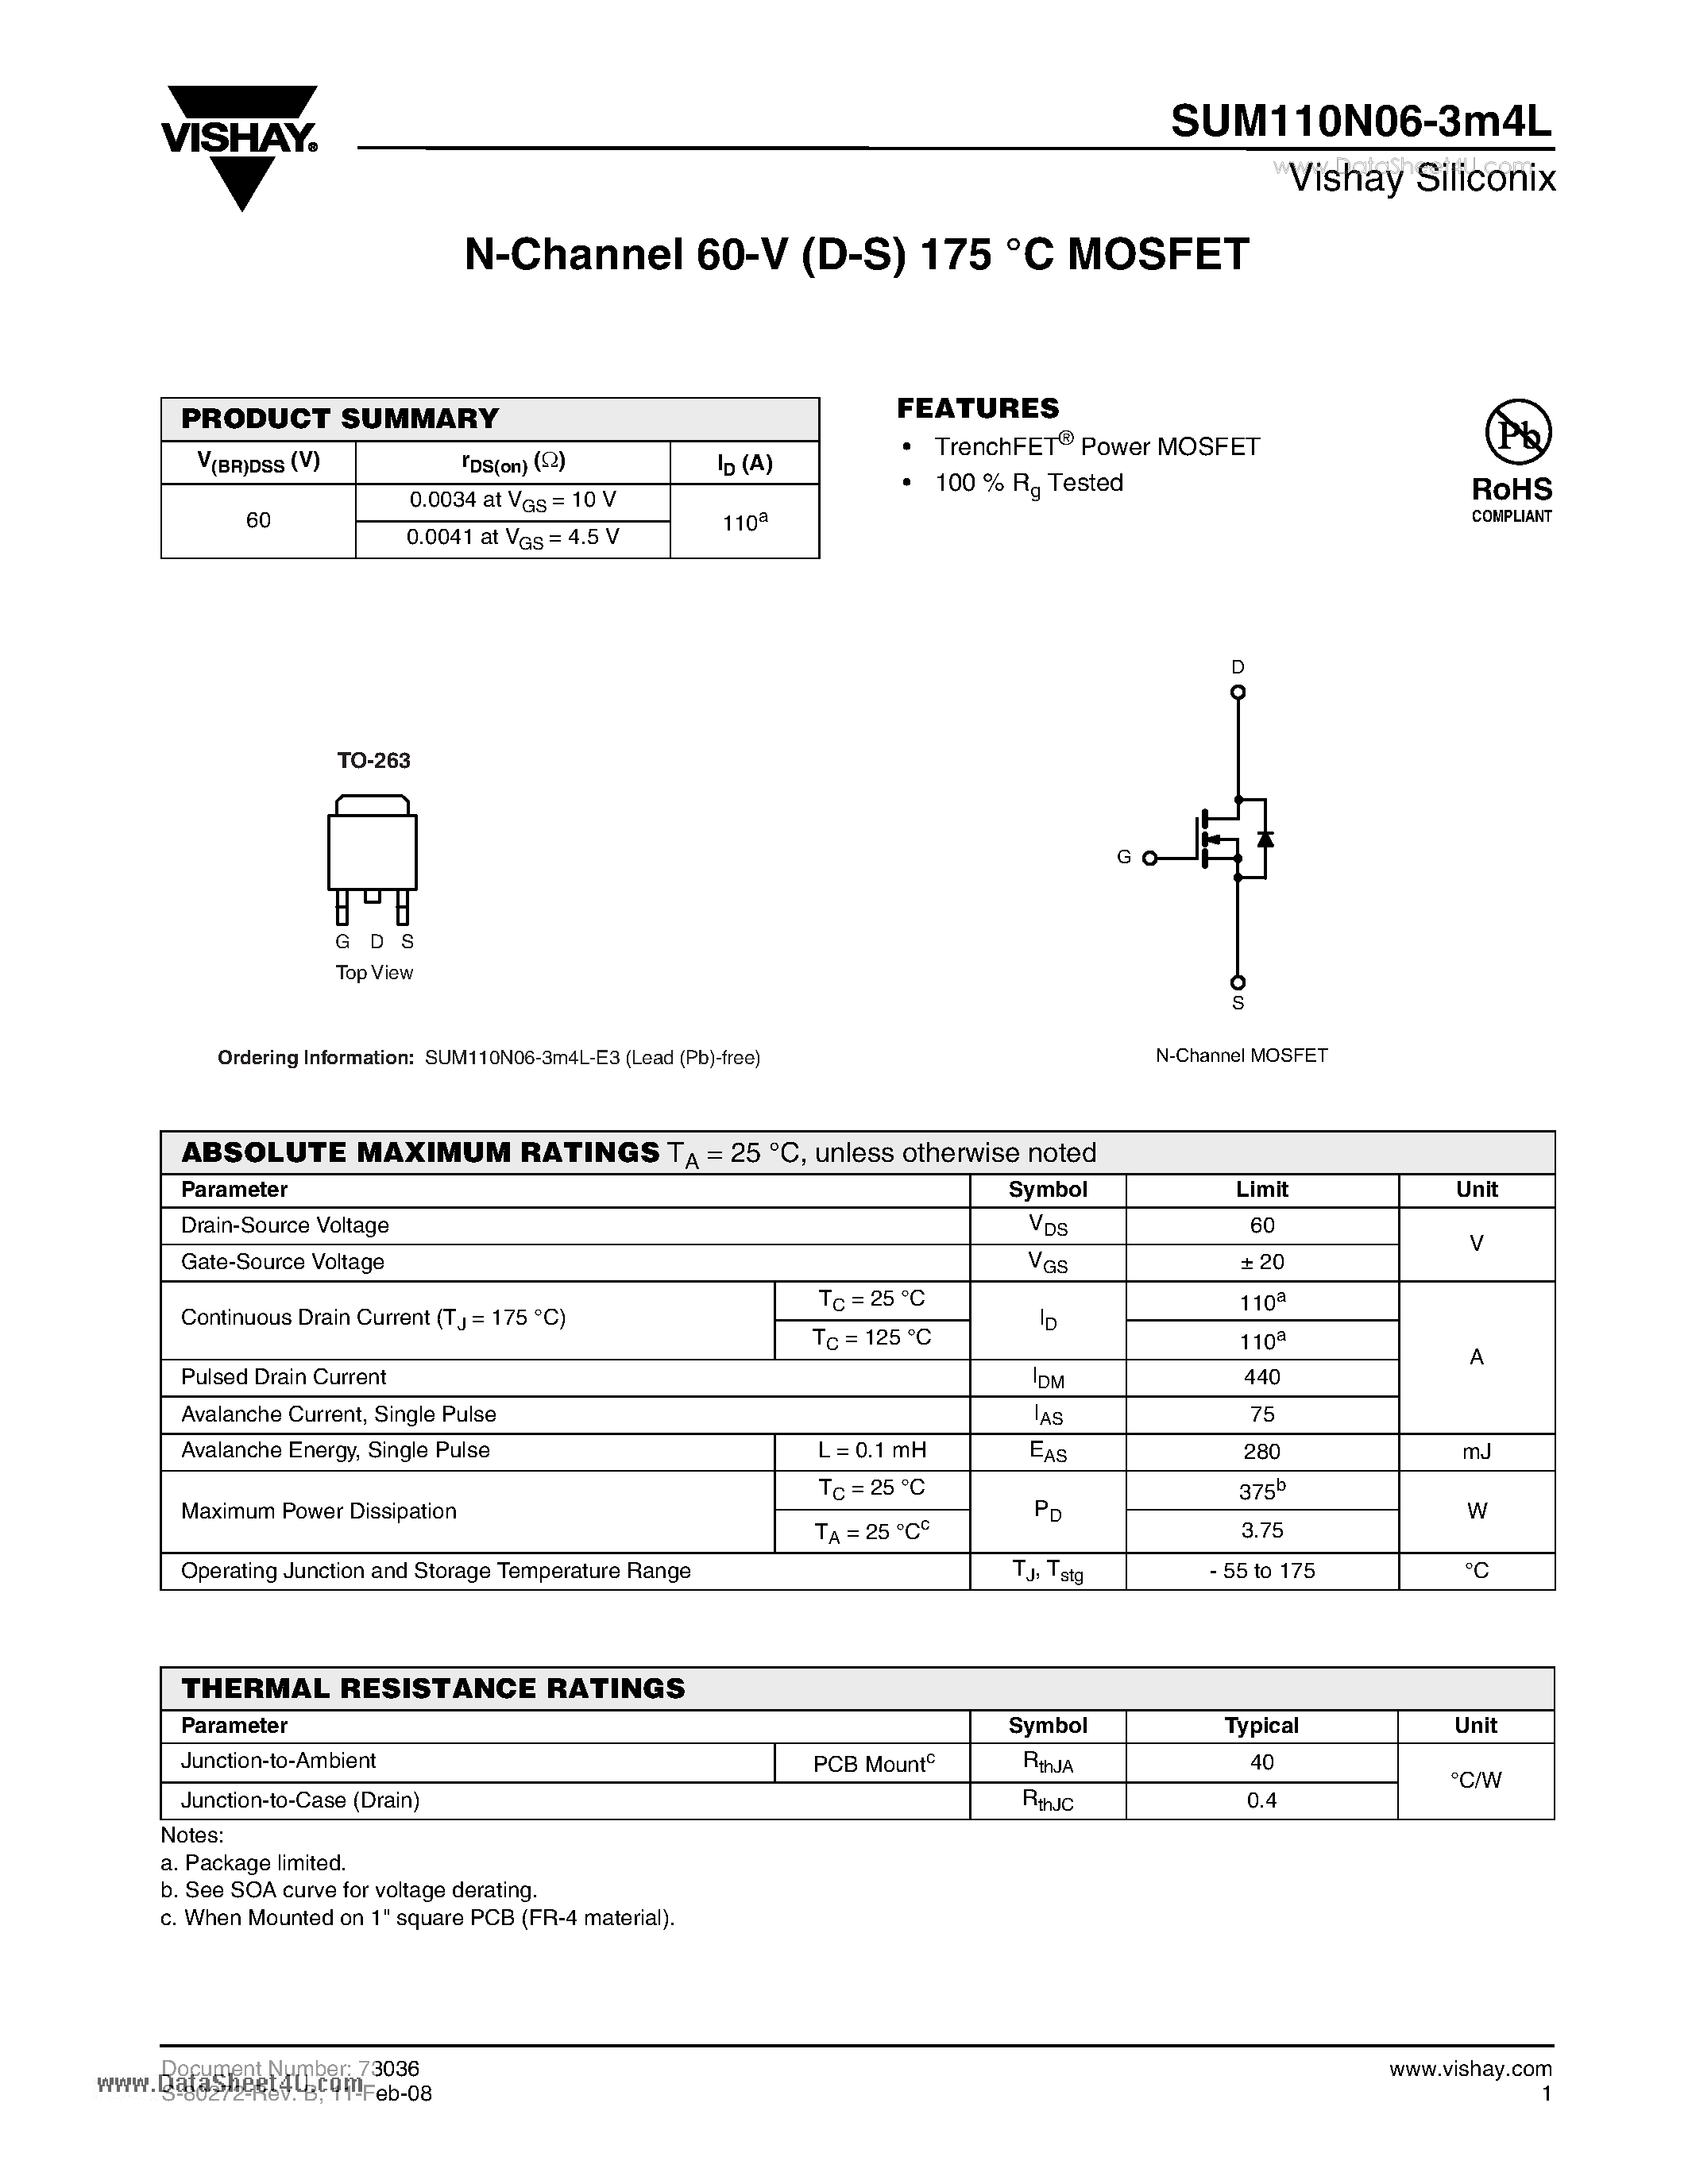 Datasheet SUM110N06-3m4L - N-Channel 60-V (D-S) 175 C MOSFET page 1